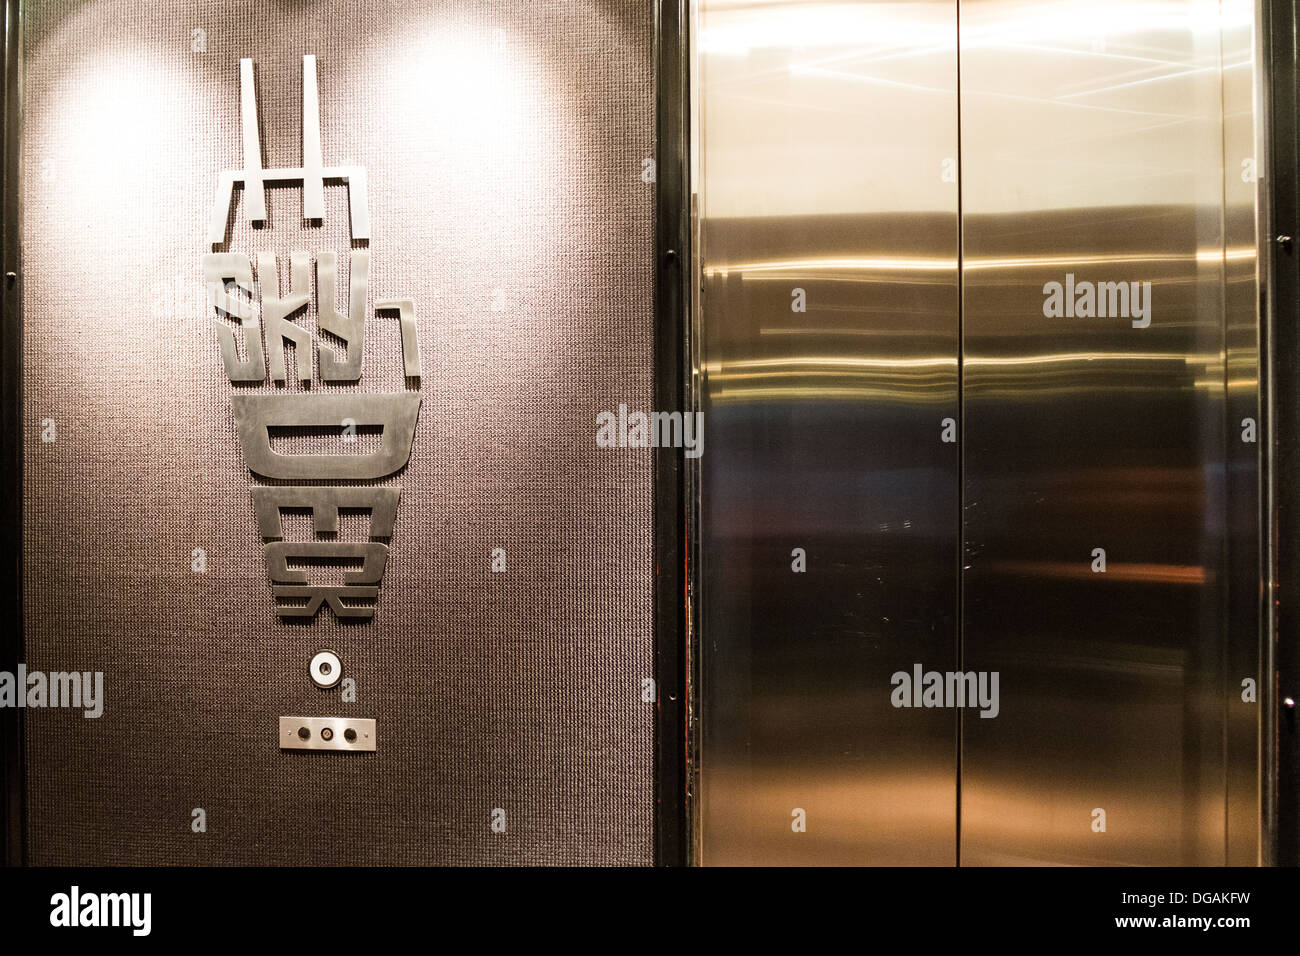 Entrance to Skydeck lifts inside Willis Tower, Chicago Stock Photo